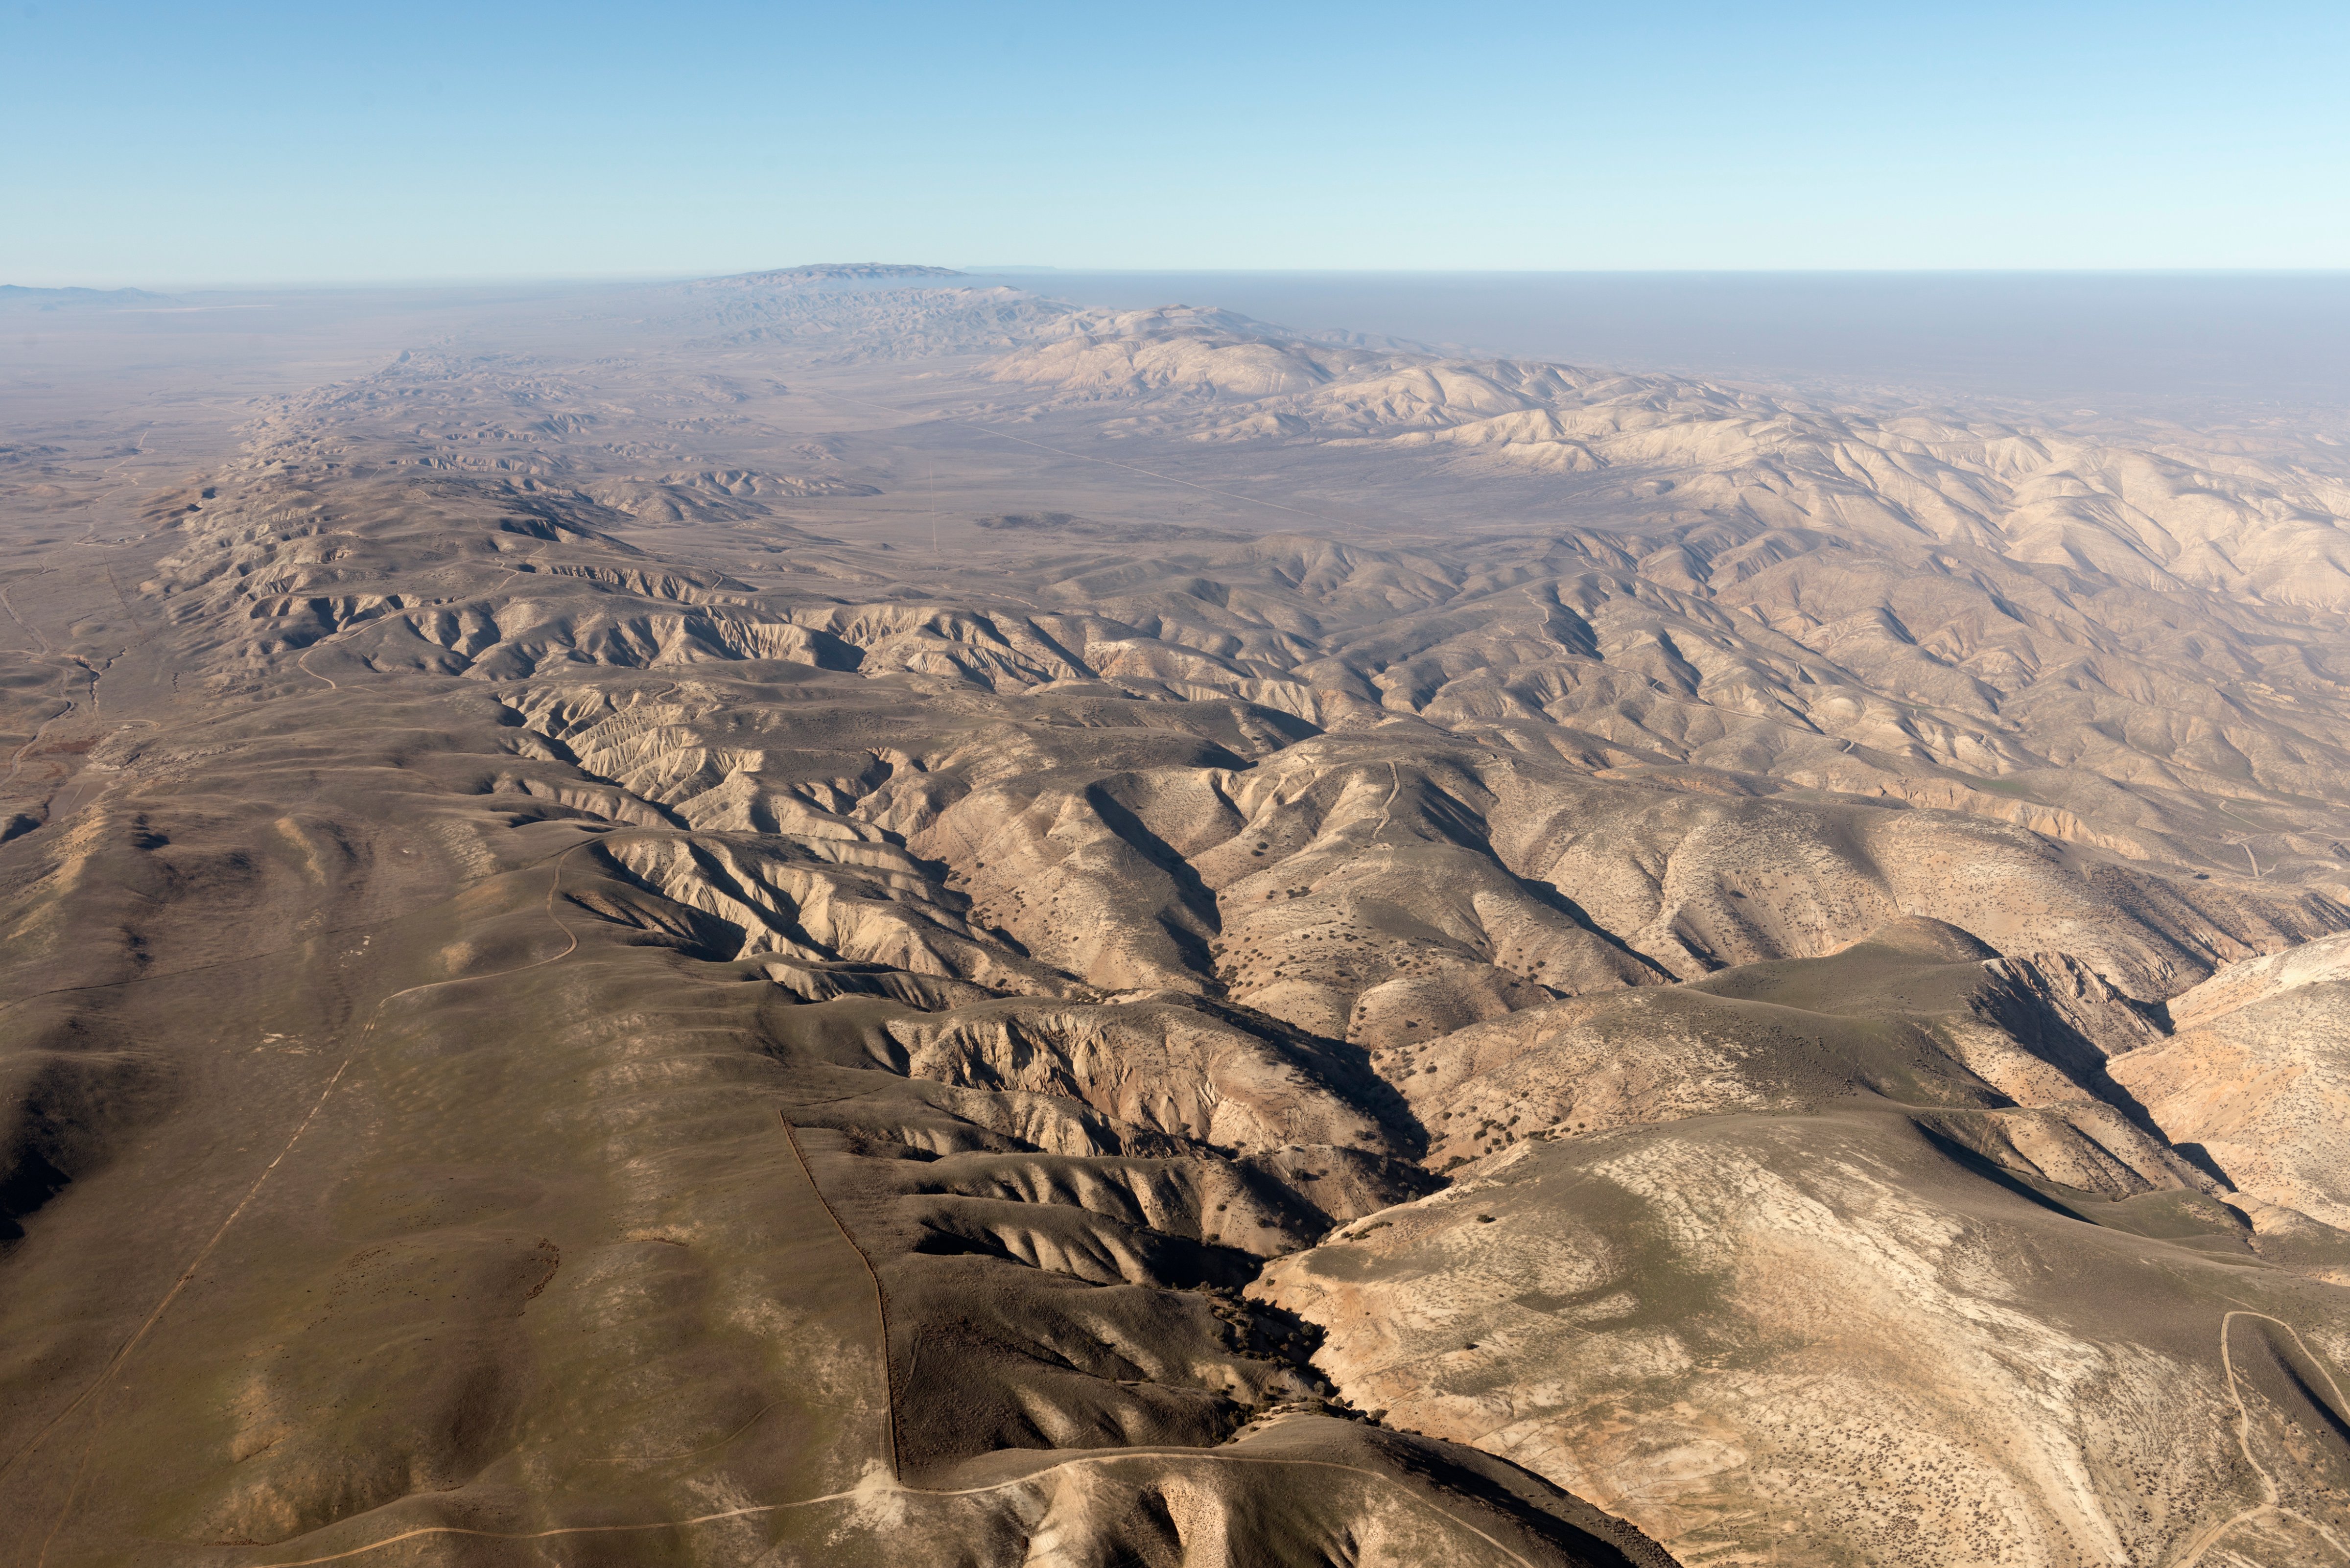 Aerial view of a portion of the San Andreas fault in California Sierra Madre Mountains, midway betwe